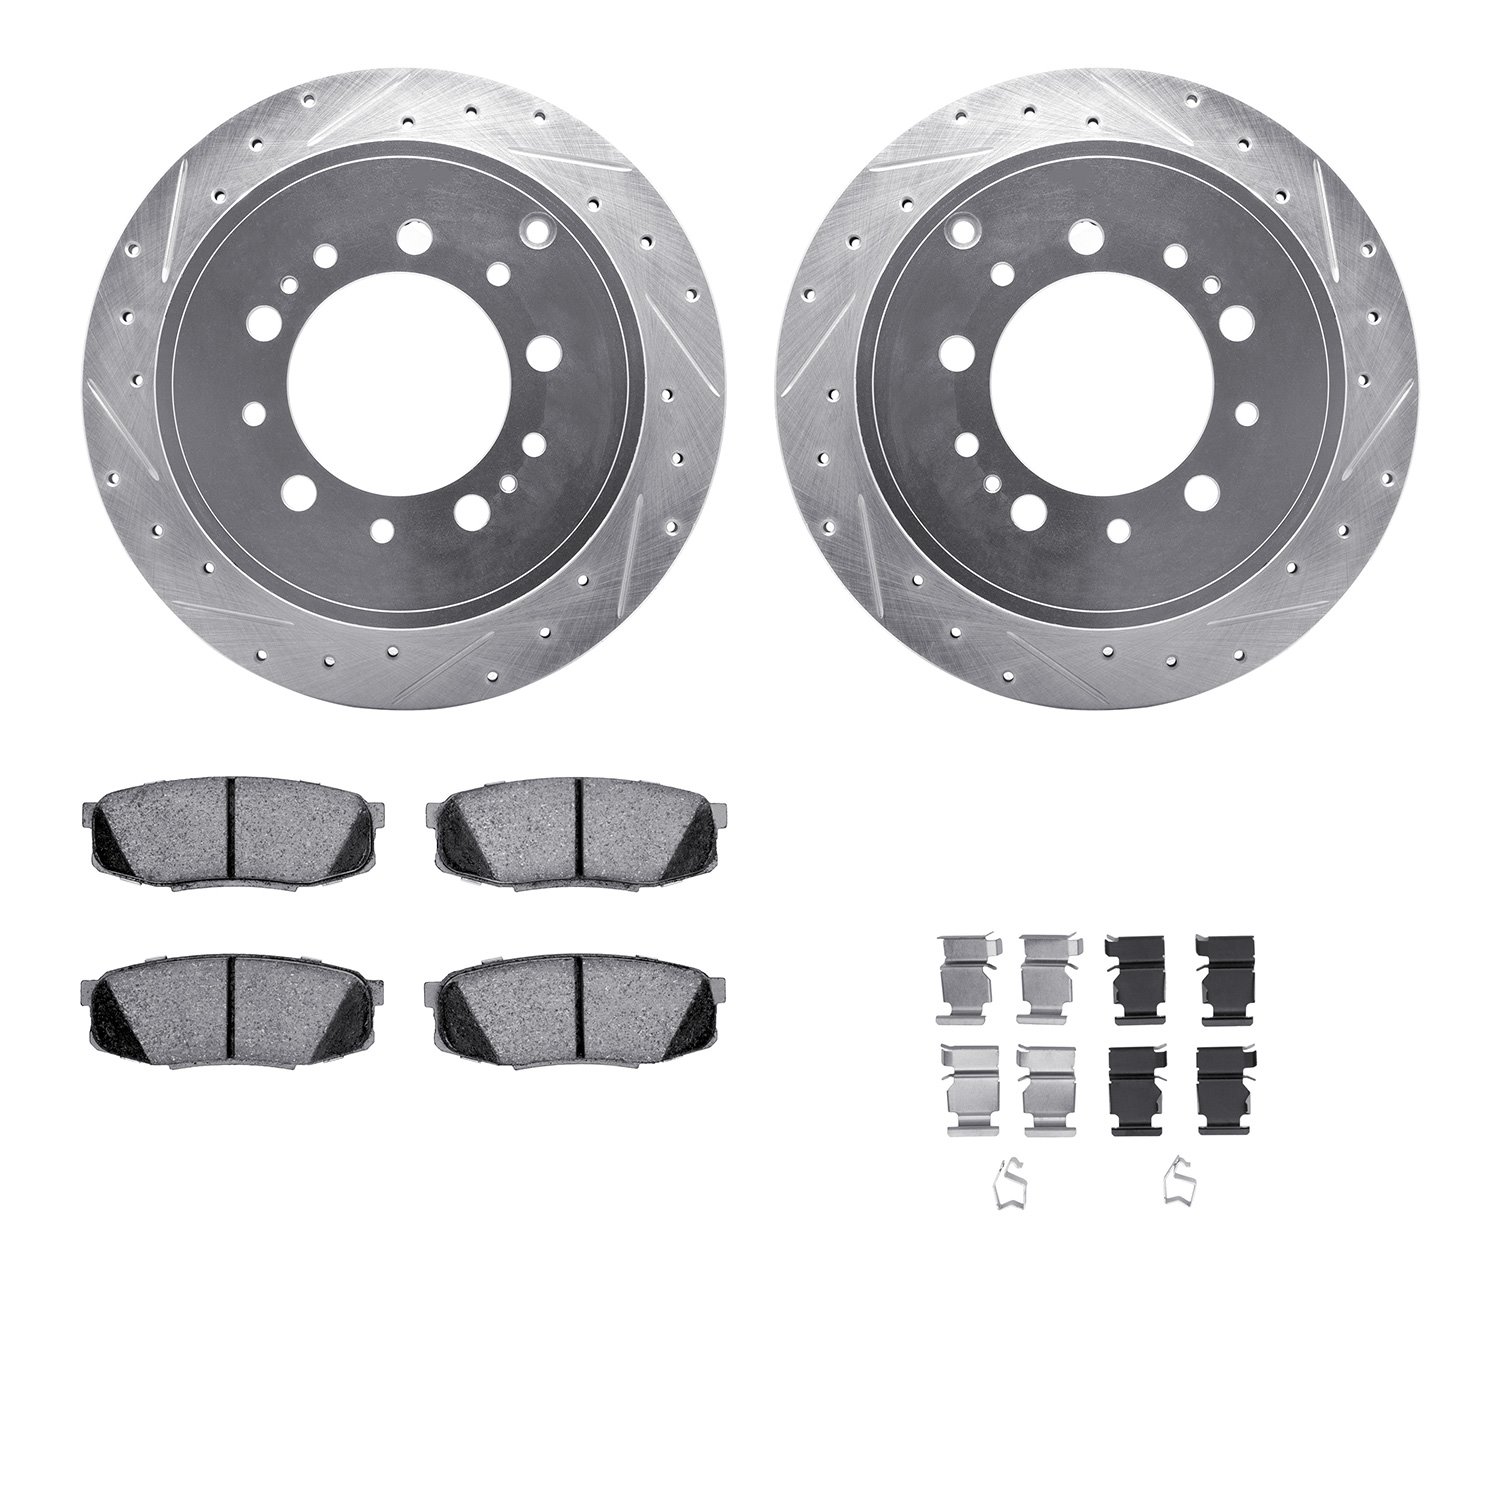 7412-76020 Drilled/Slotted Brake Rotors with Ultimate-Duty Brake Pads Kit & Hardware [Silver], Fits Select Lexus/Toyota/Scion, P